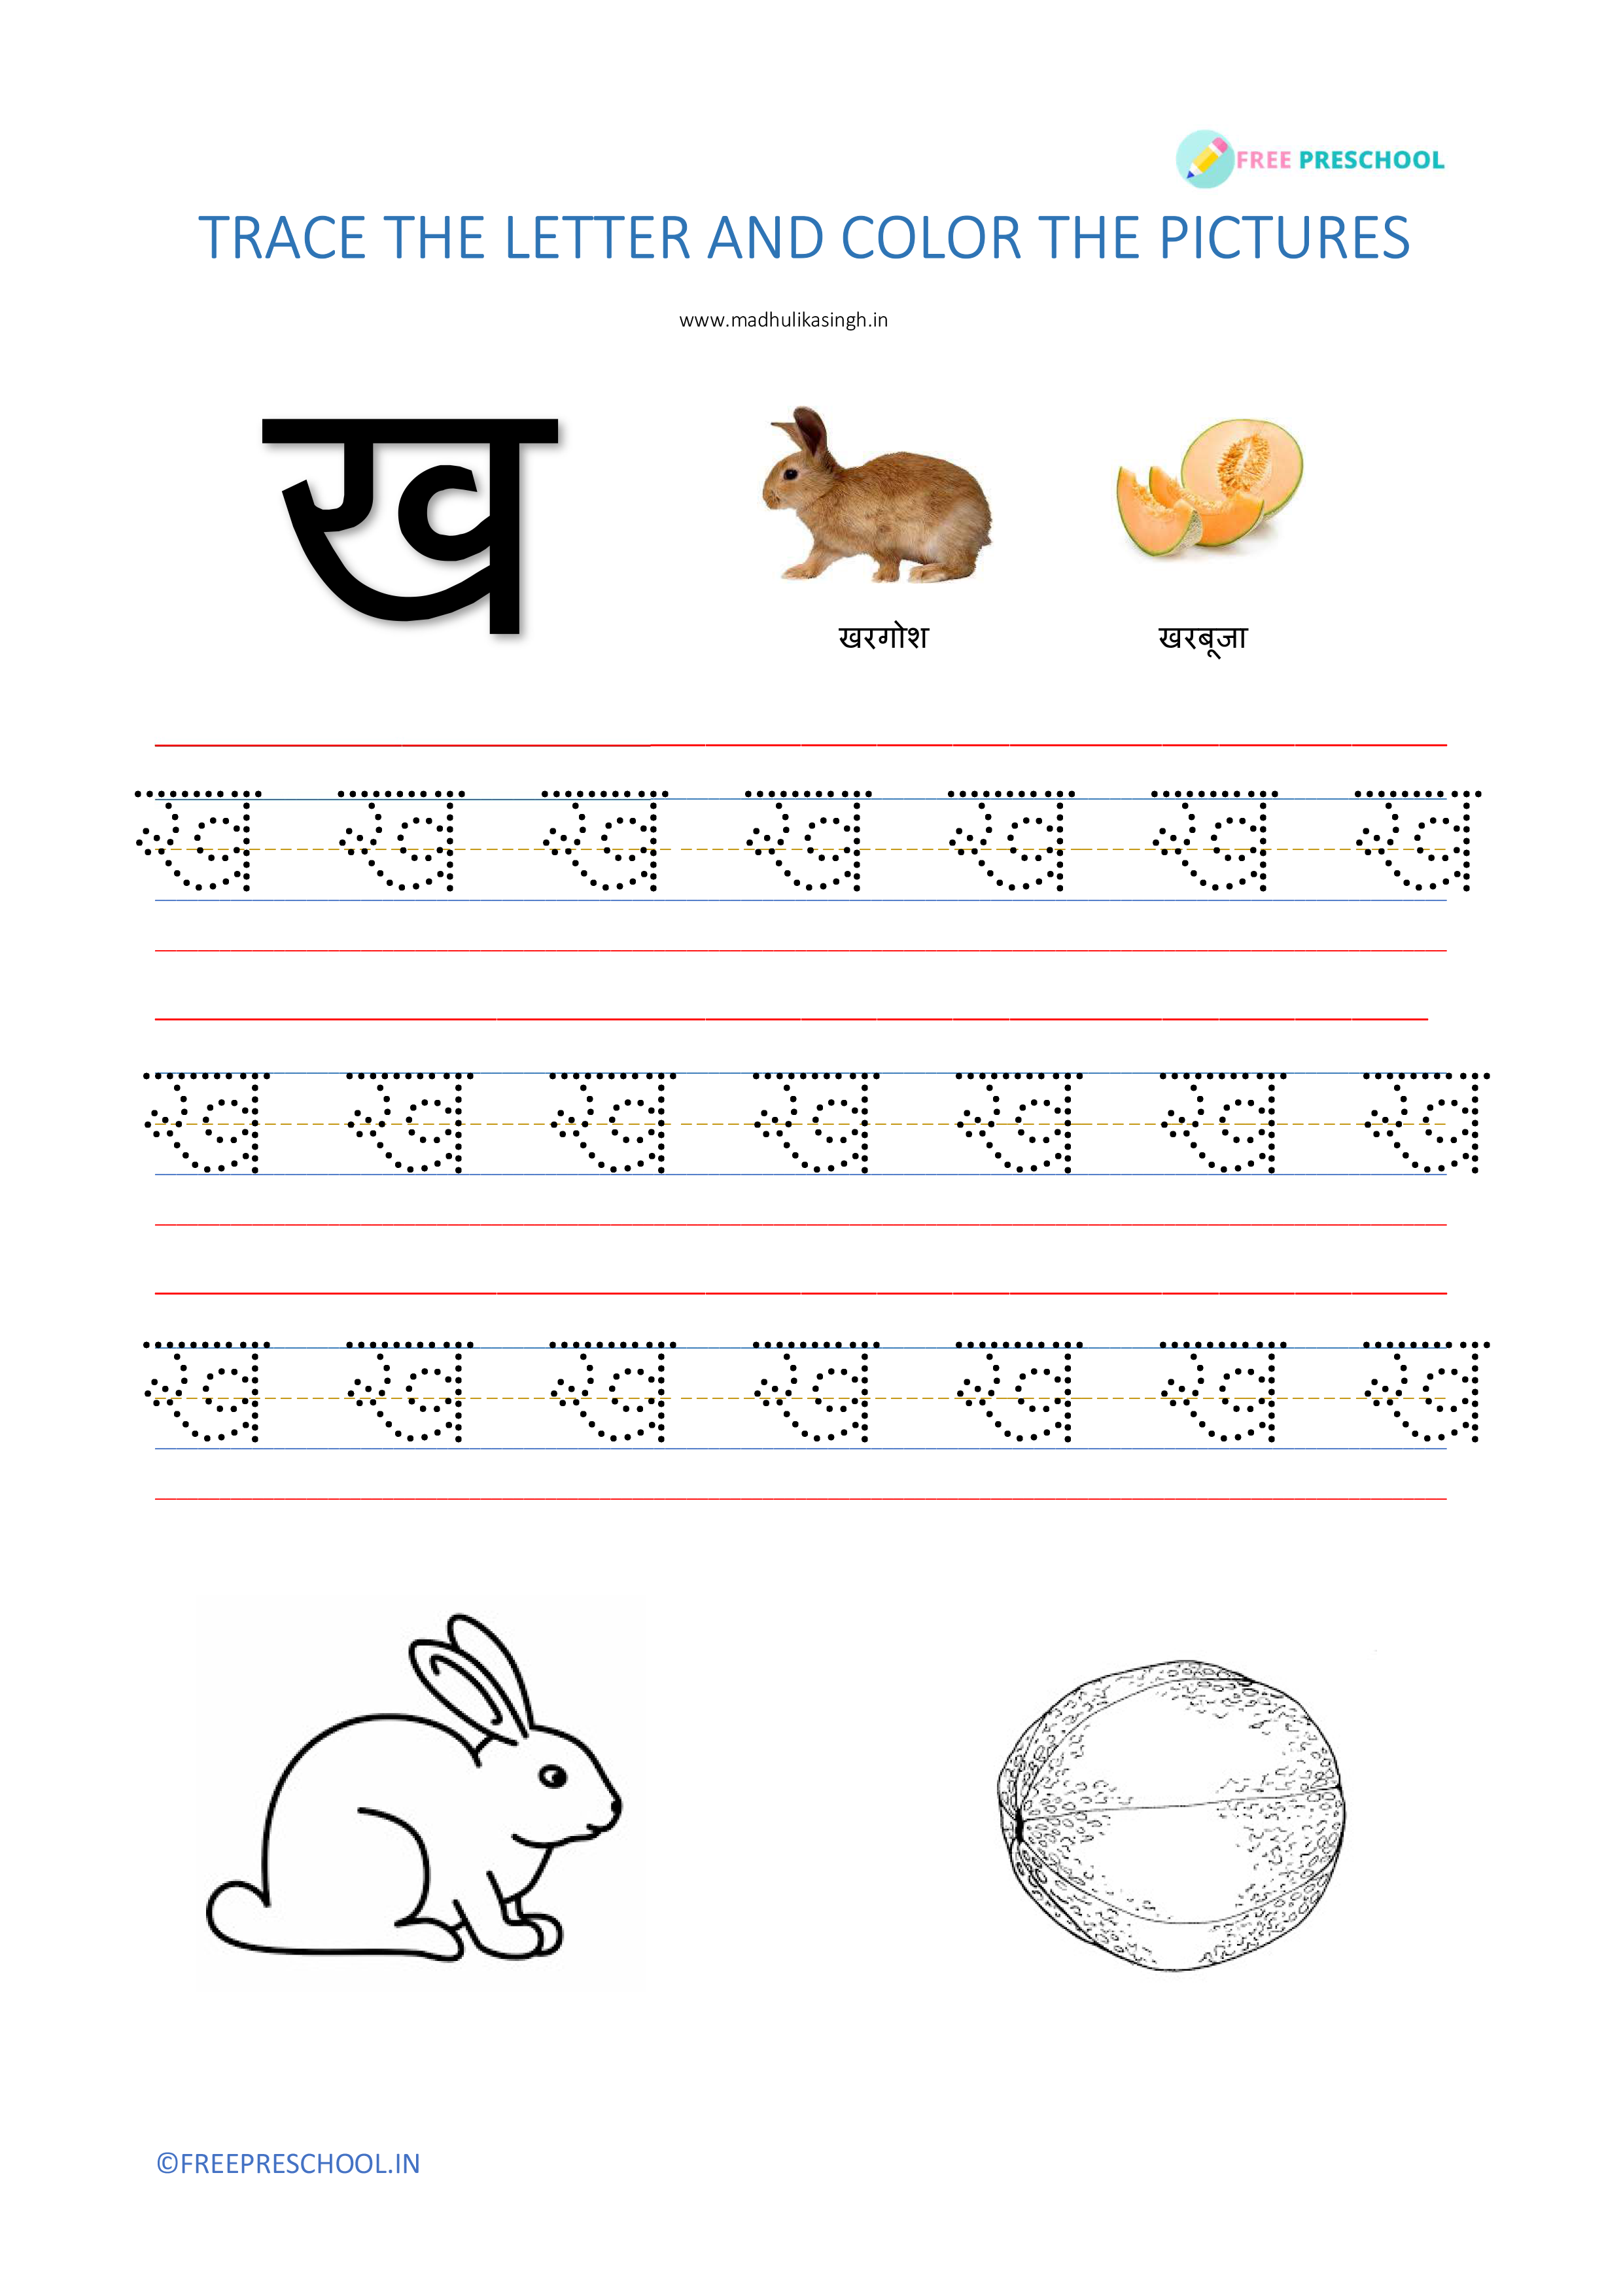 hindi-alphabet-tracing-worksheets-printable-pdf-a-to-jania-56-pages